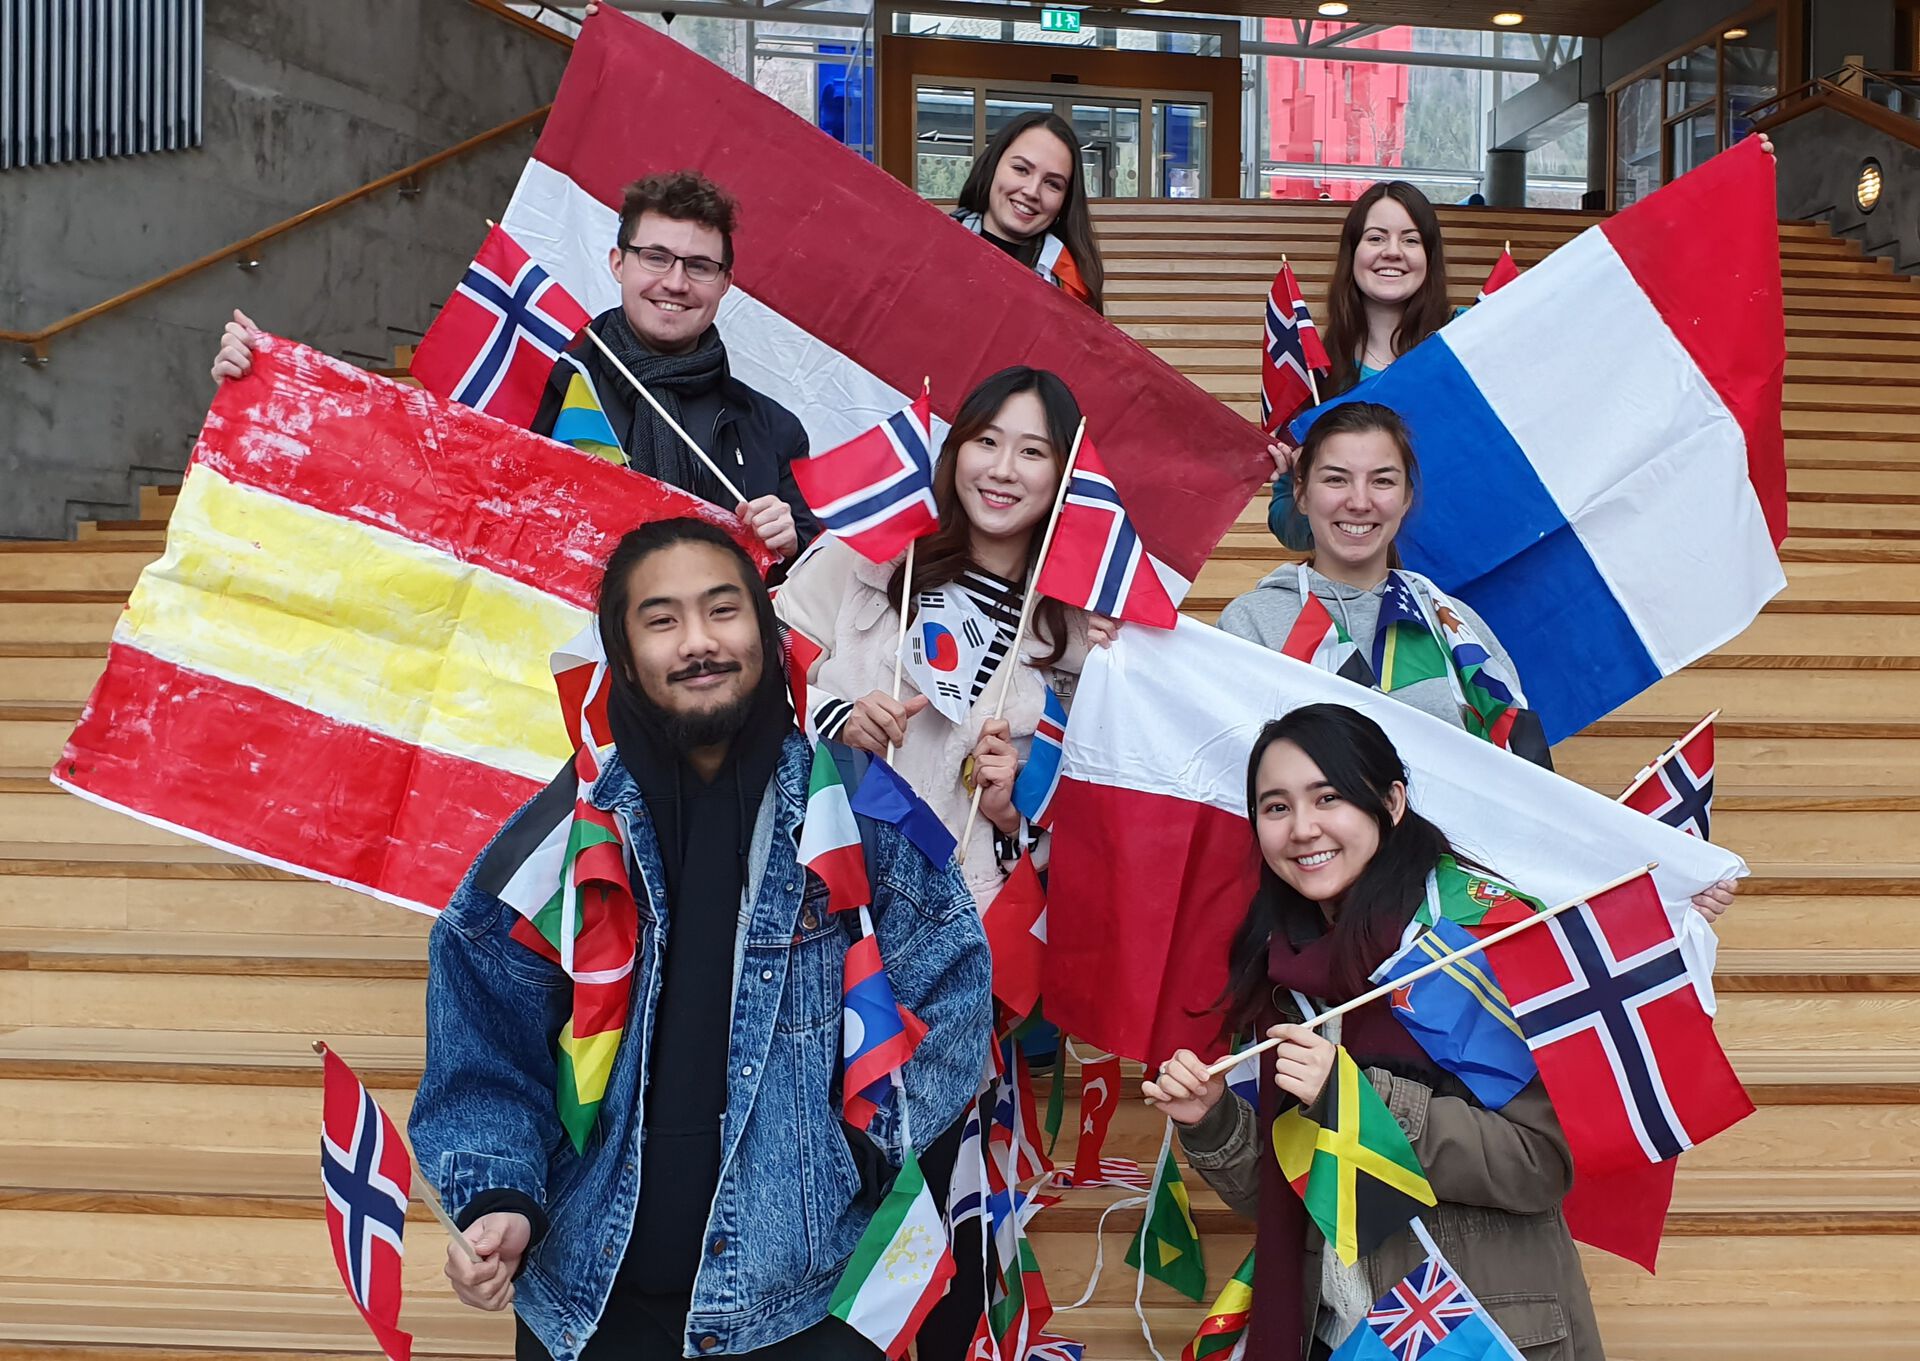 International Buddies standing on a staircase holding various flags and smiling